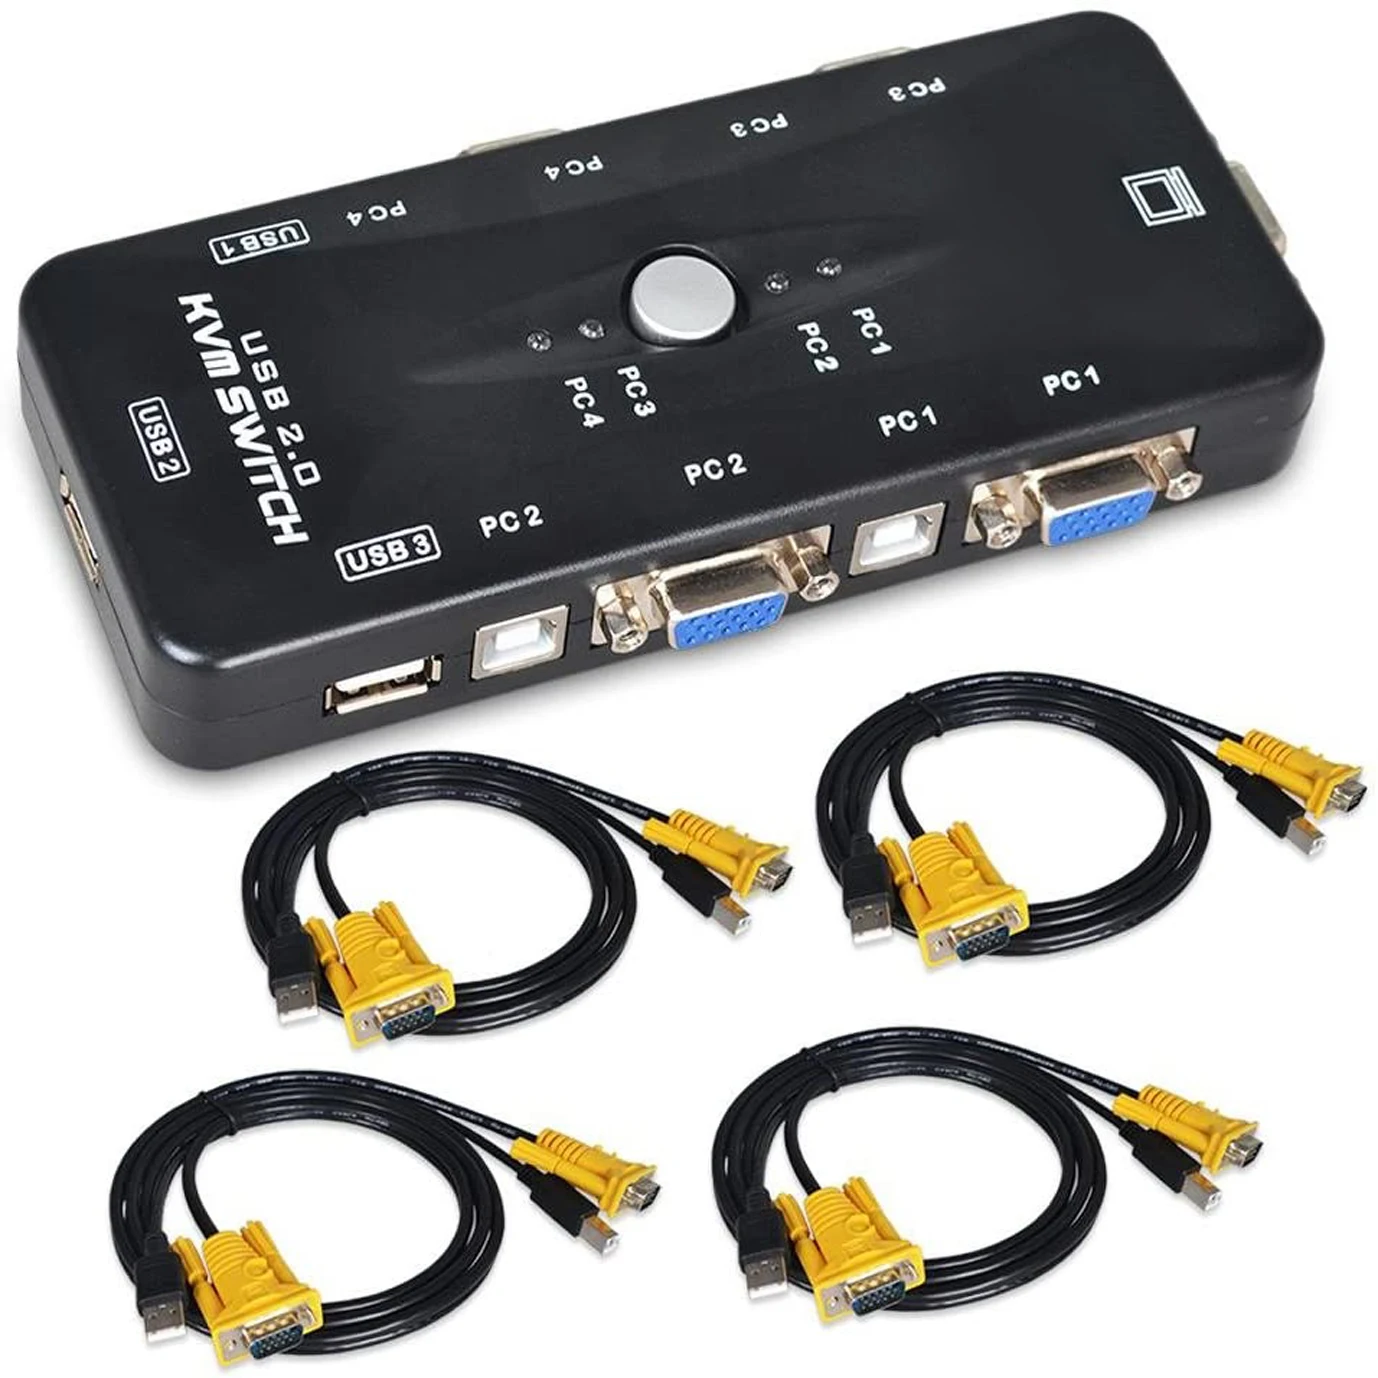 

USB KVM Switch 4 Port PC Monitor Switches with 4 USB VGA Cables for Computer Keyboard Mouse Monitor, Black